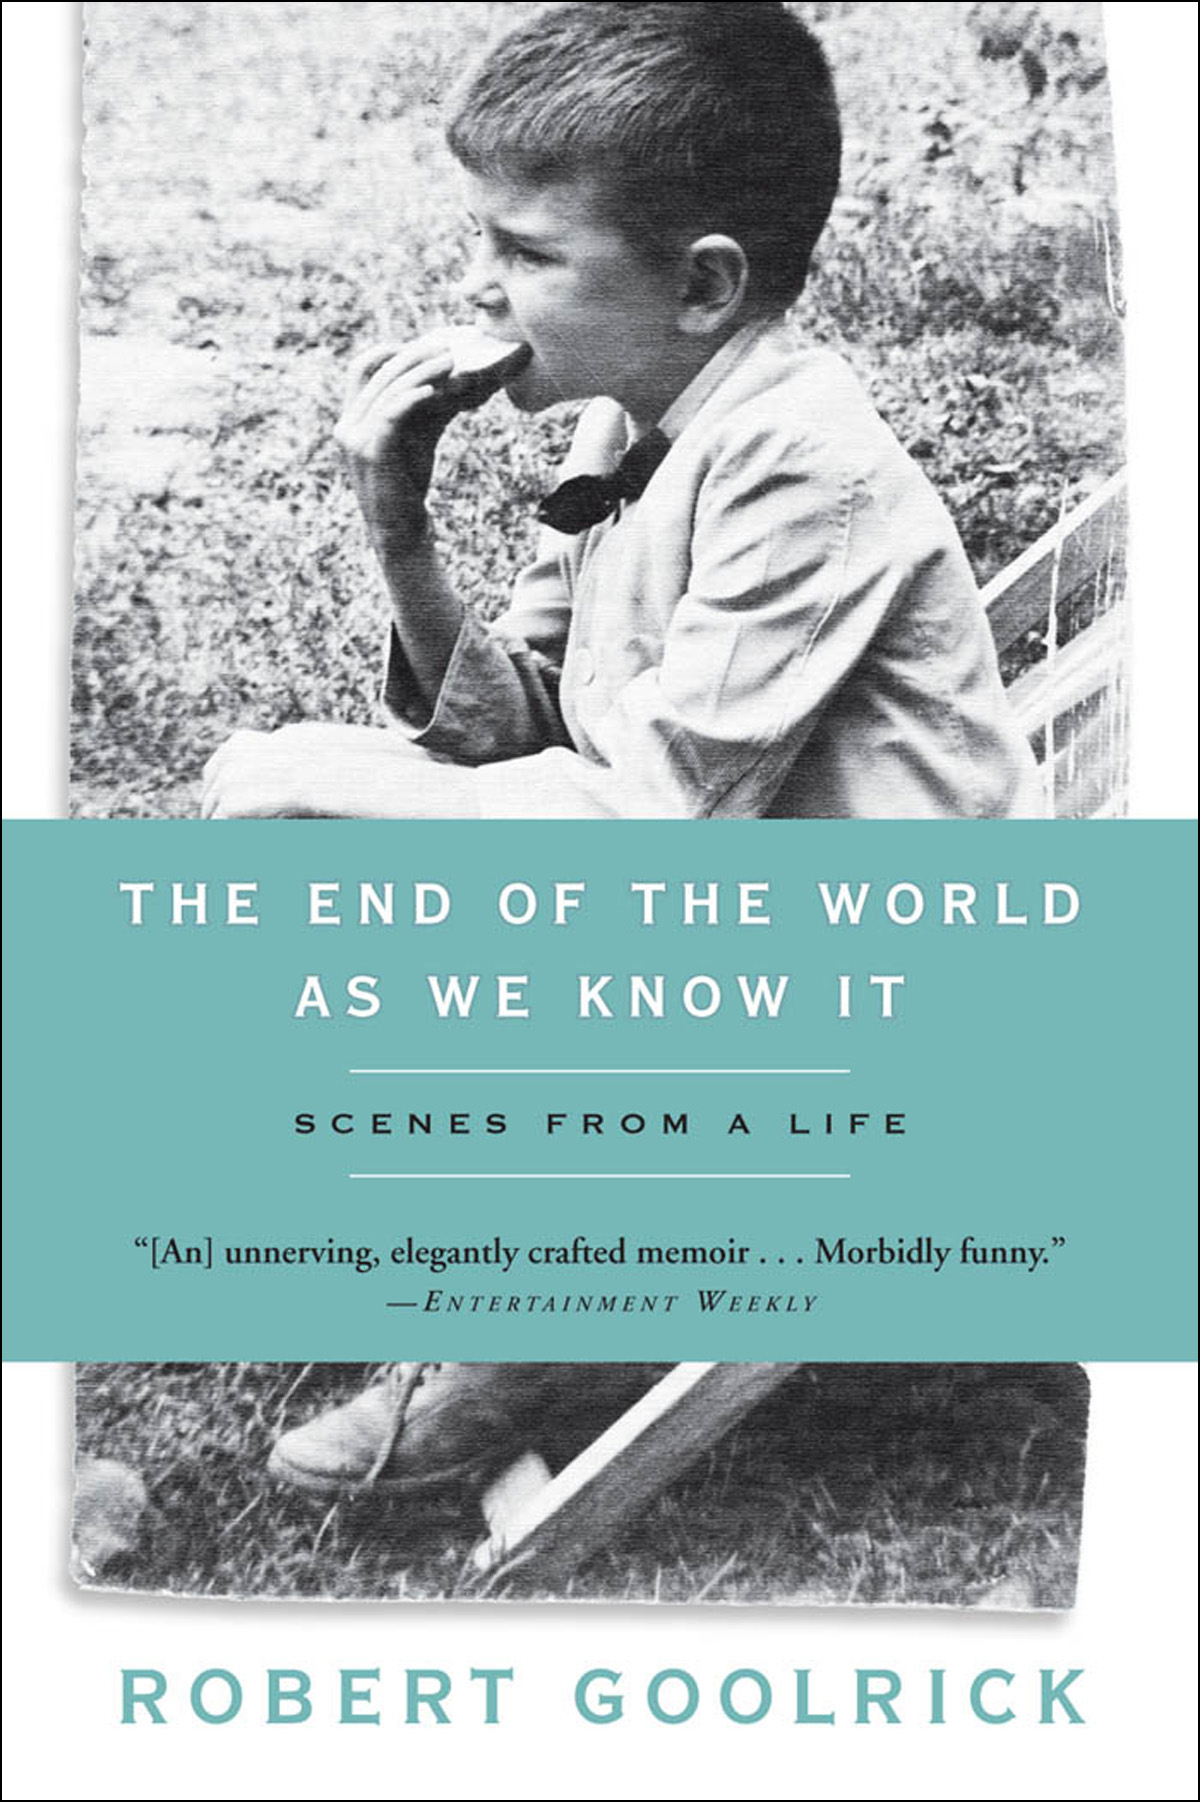 The End of the World as We Know It (2007) by Robert Goolrick